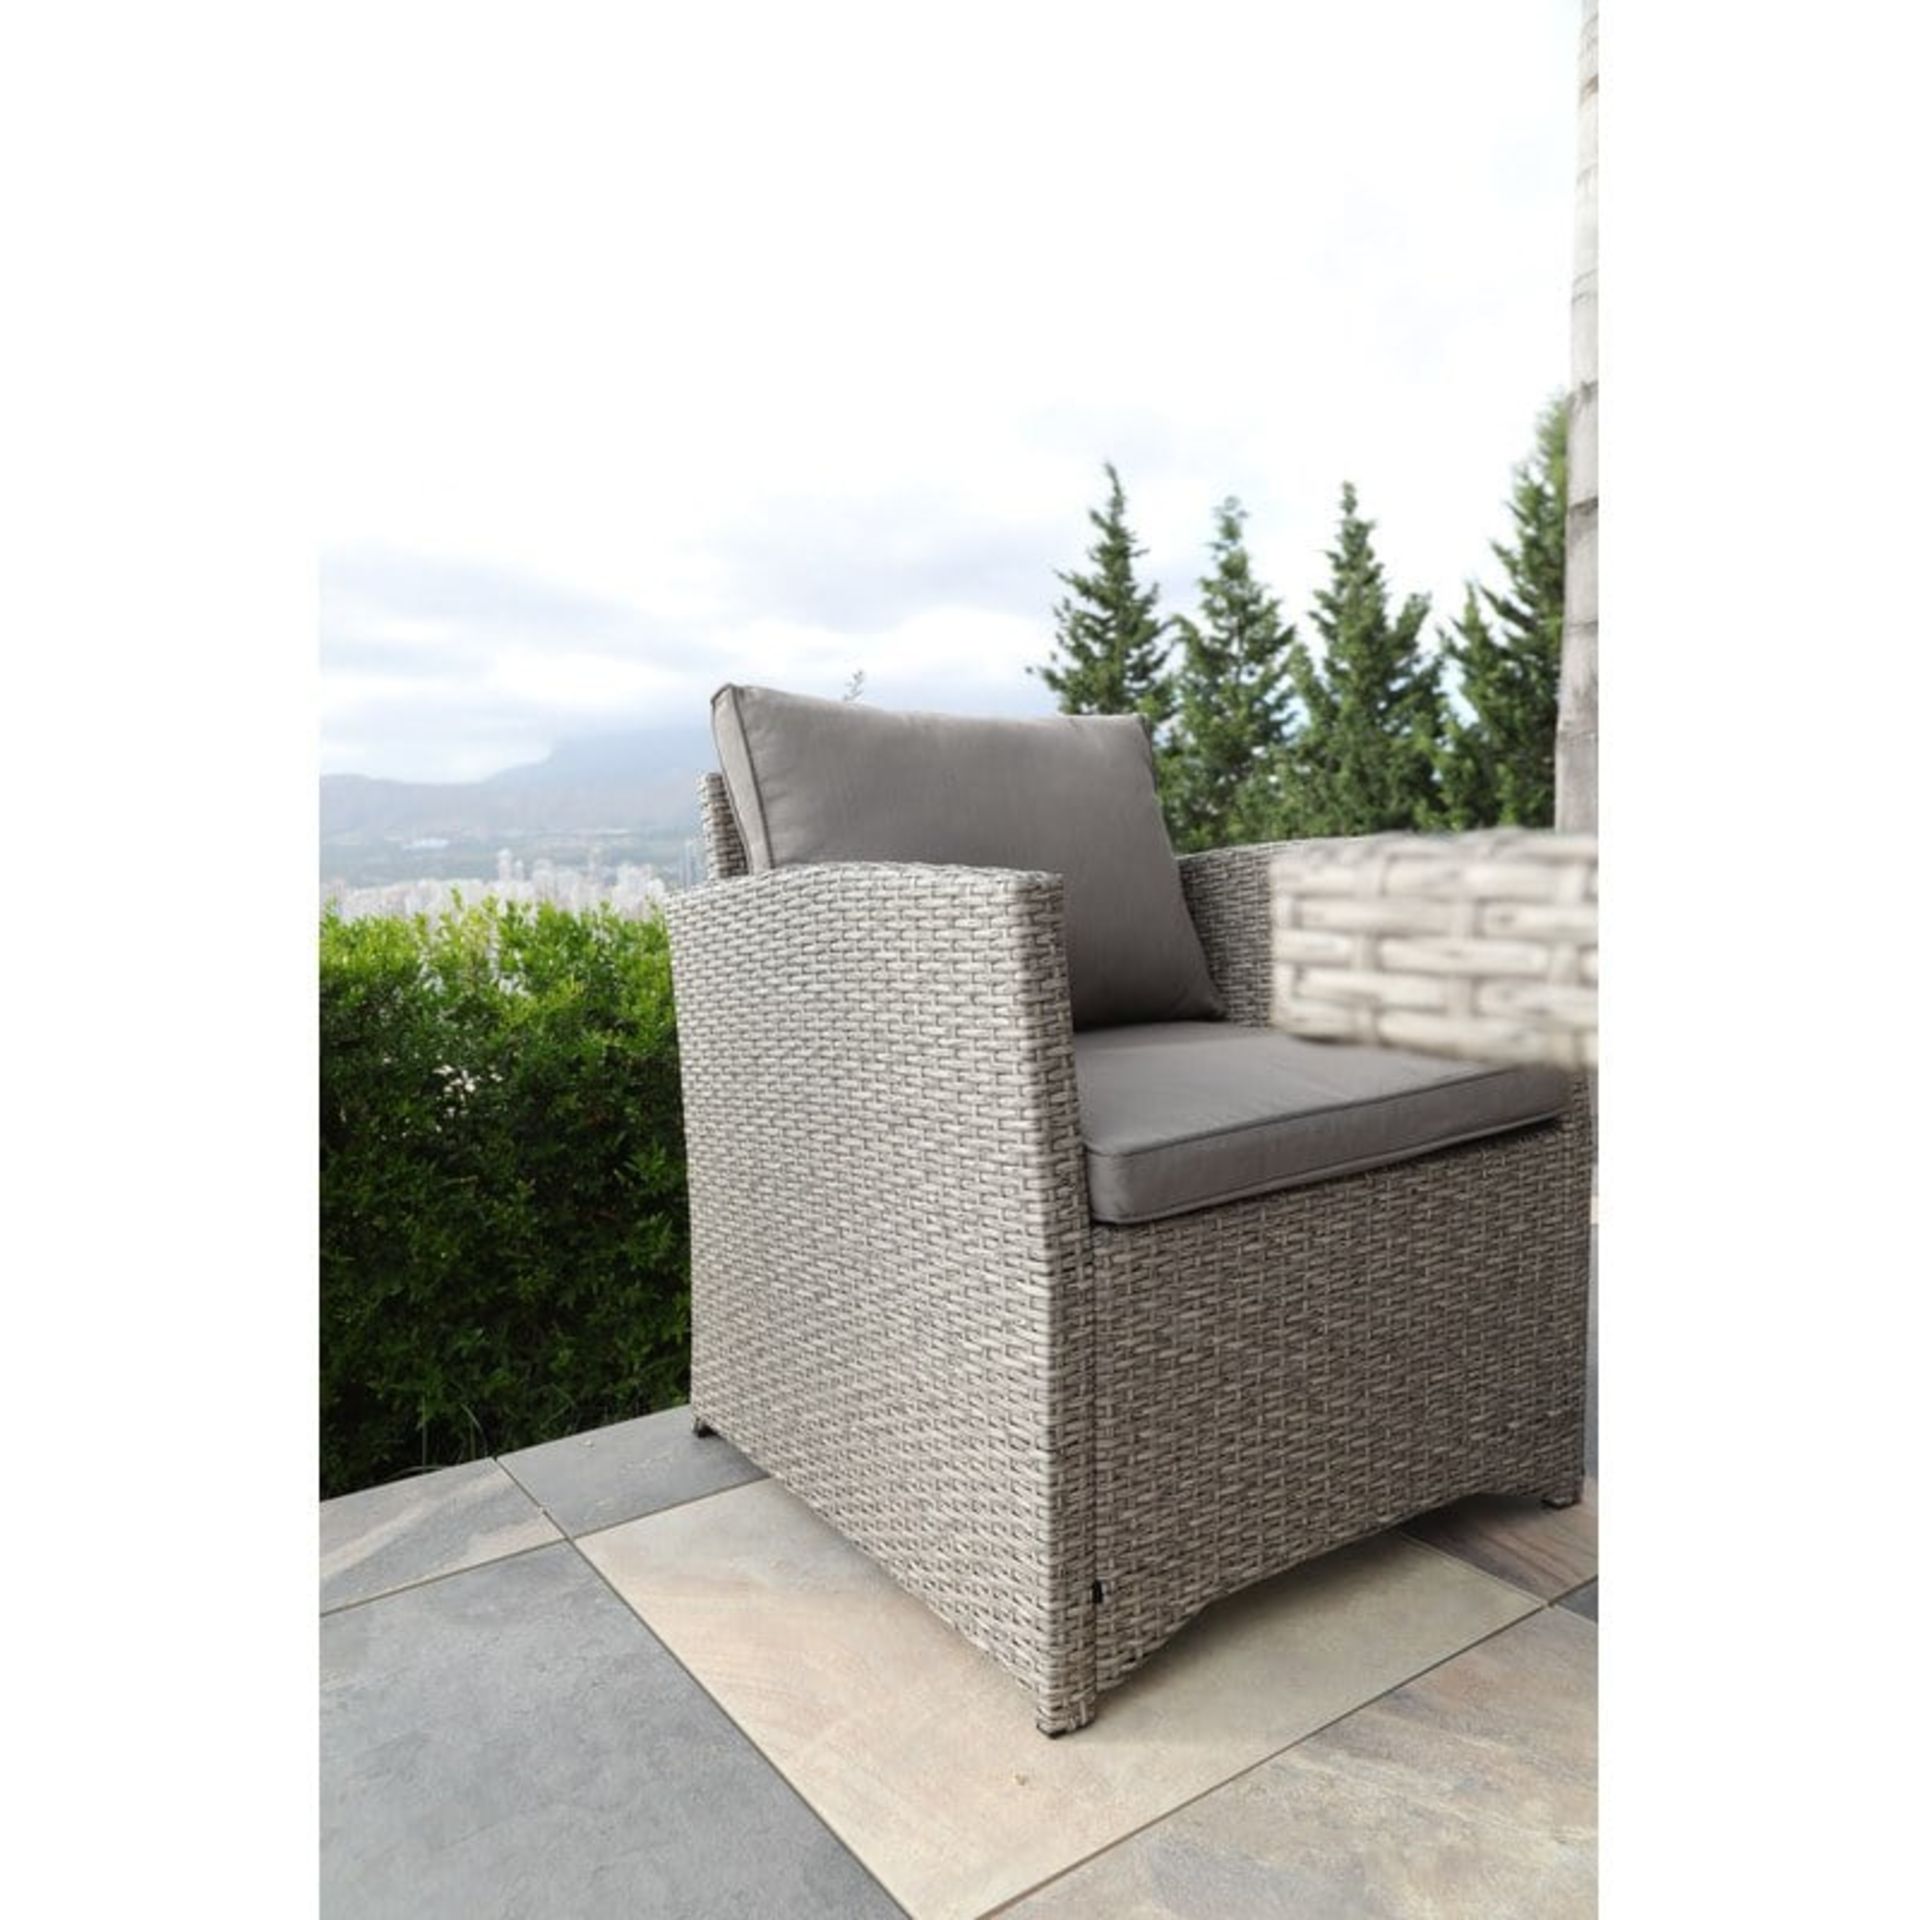 * 1 xBrand New - In Cardboard Boxes - Garden Rattan Furntiure Set. Brown wicker with Brown Cushions. - Image 5 of 11